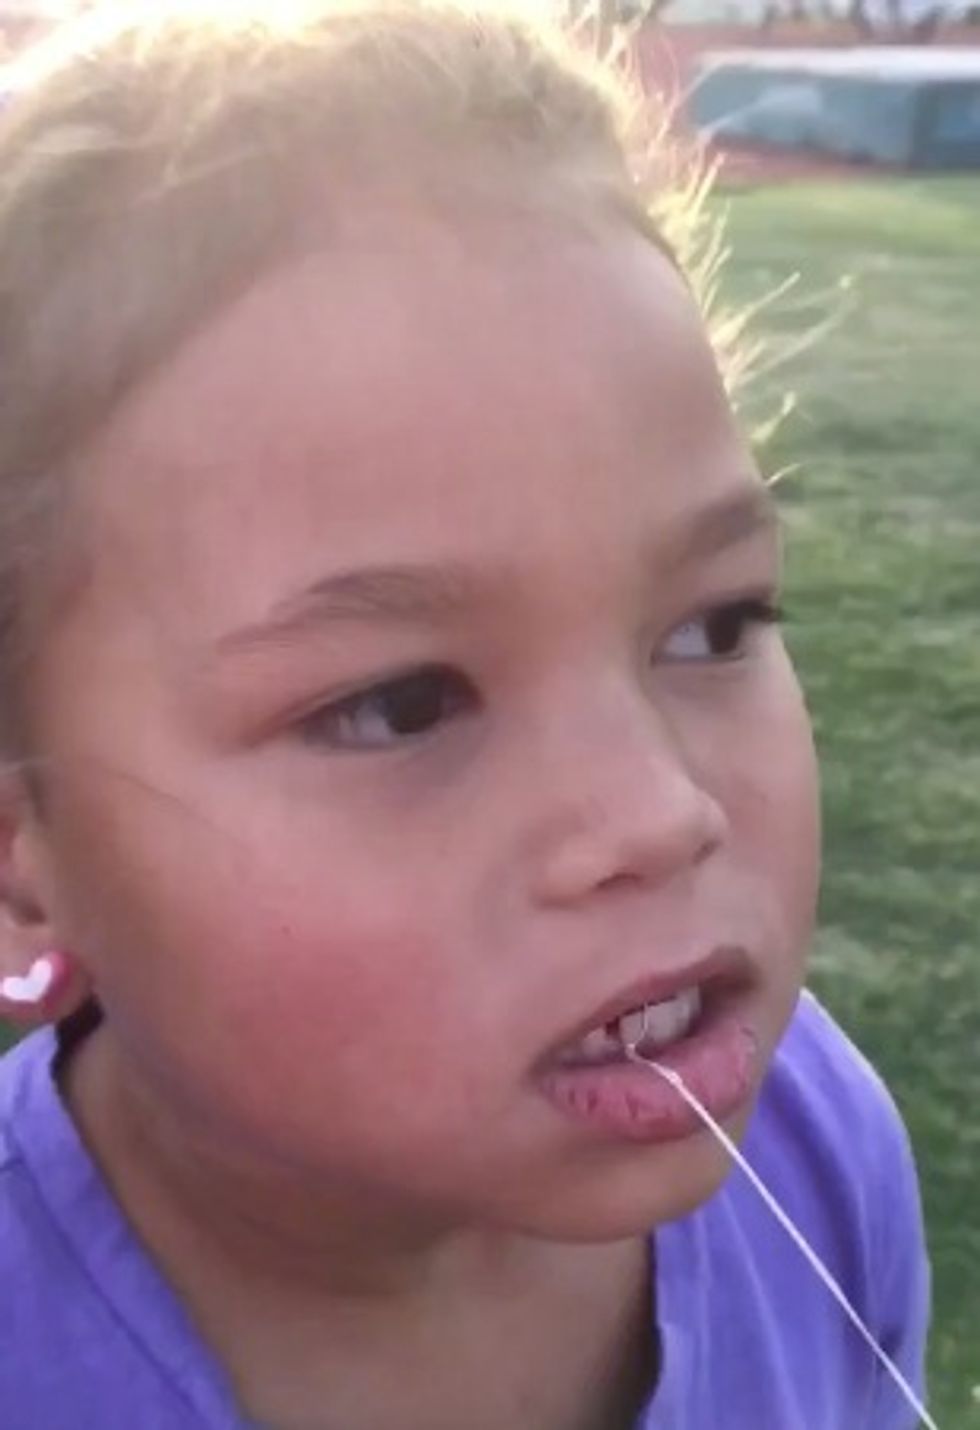 Only a Former Olympic Decathlete Would Pull His Daughter's Loose Tooth Out Like This